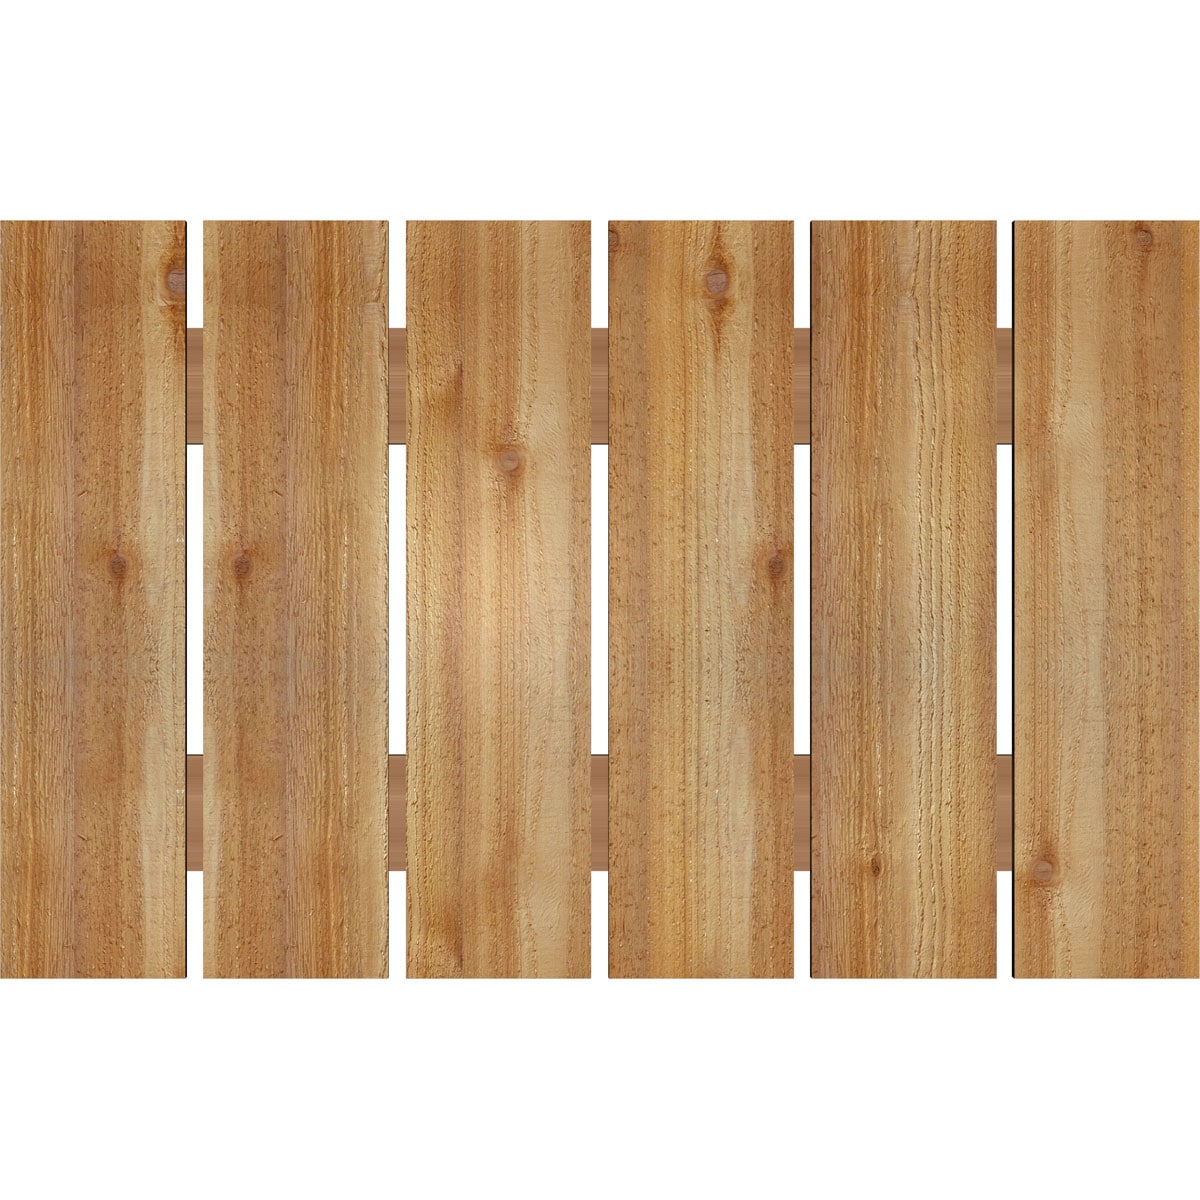 Ekena Millwork 2-Pack 34.75-in W x 22-in H Unfinished Board and Batten Spaced Wood Western Red cedar Exterior Shutters